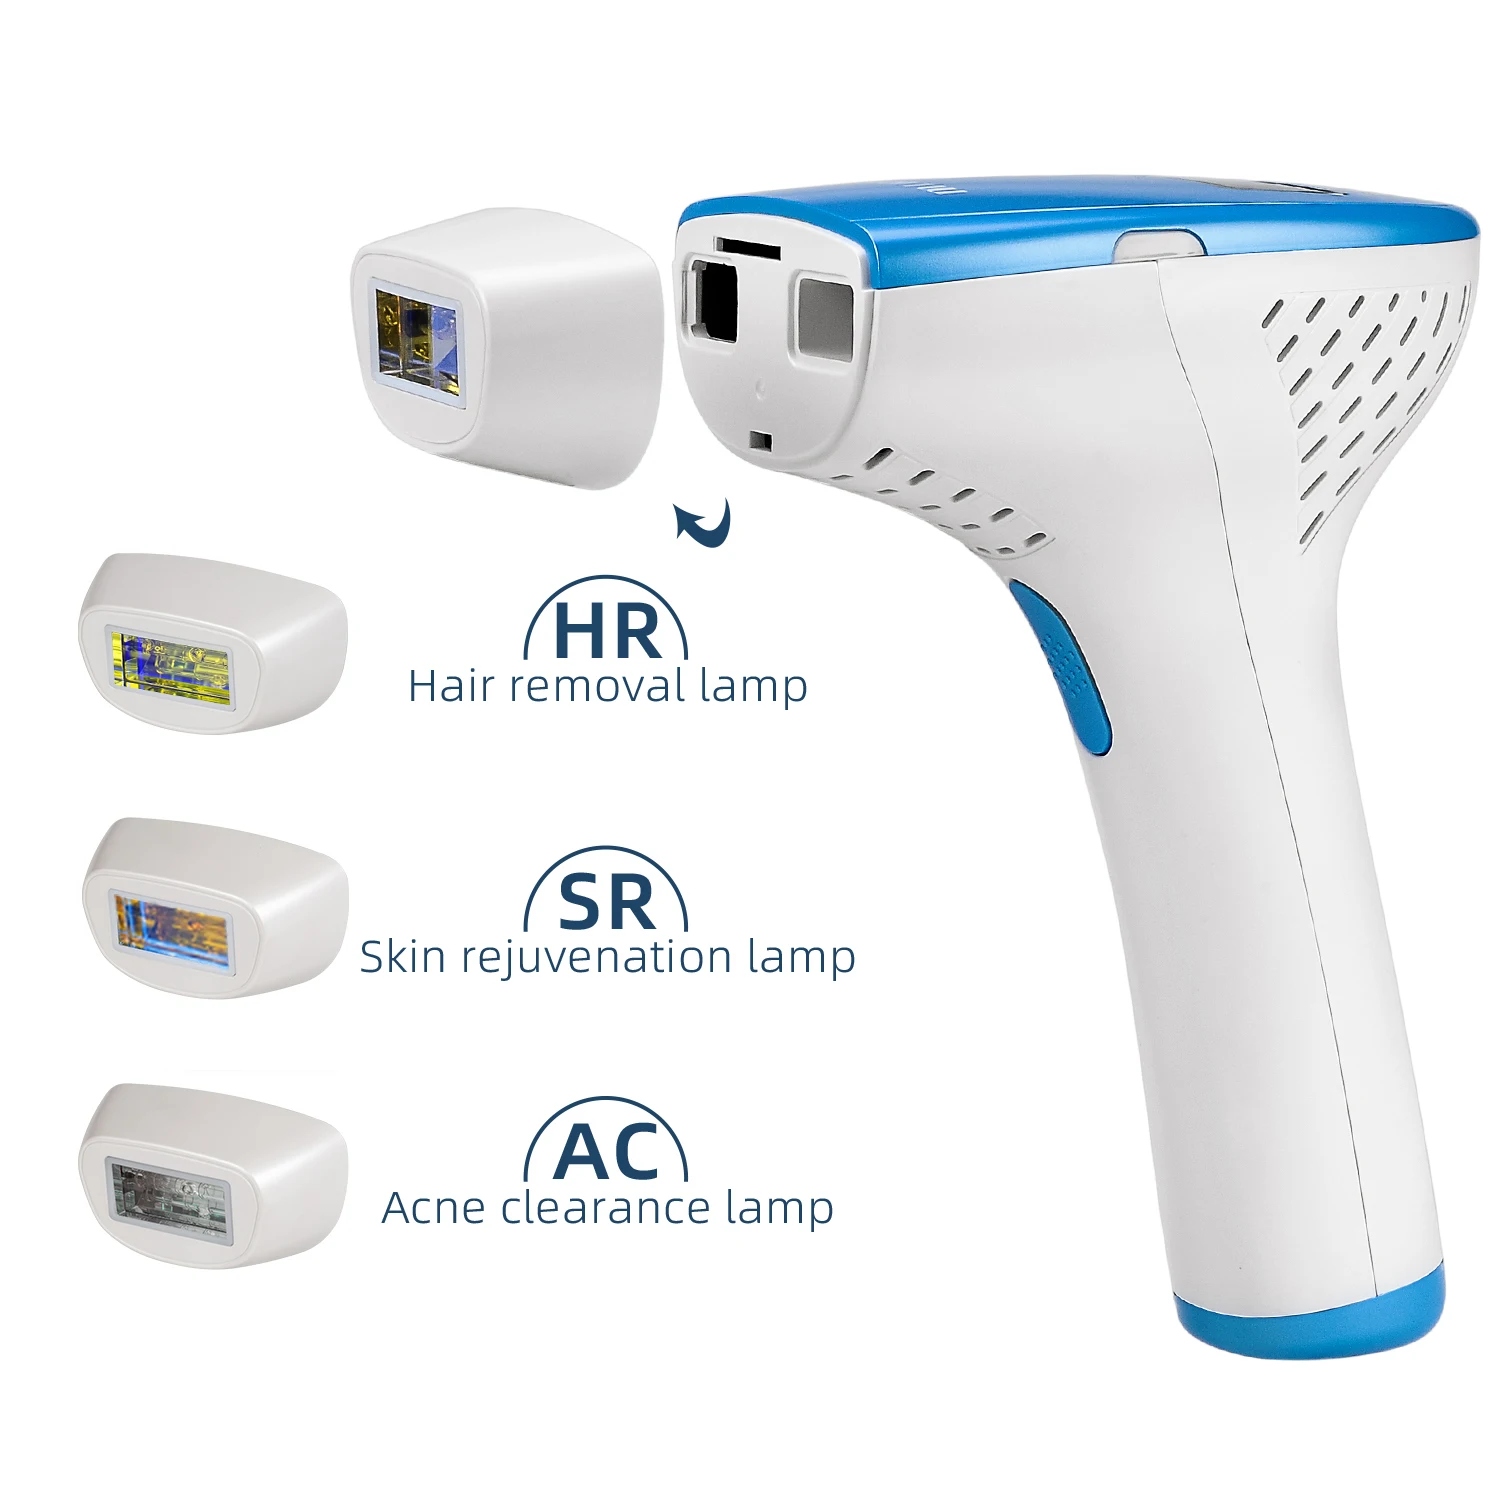 Mlay M3 Automatic 500000 Shots Portable Home Use Ipl Hair Removal Laser Device Free Shipping